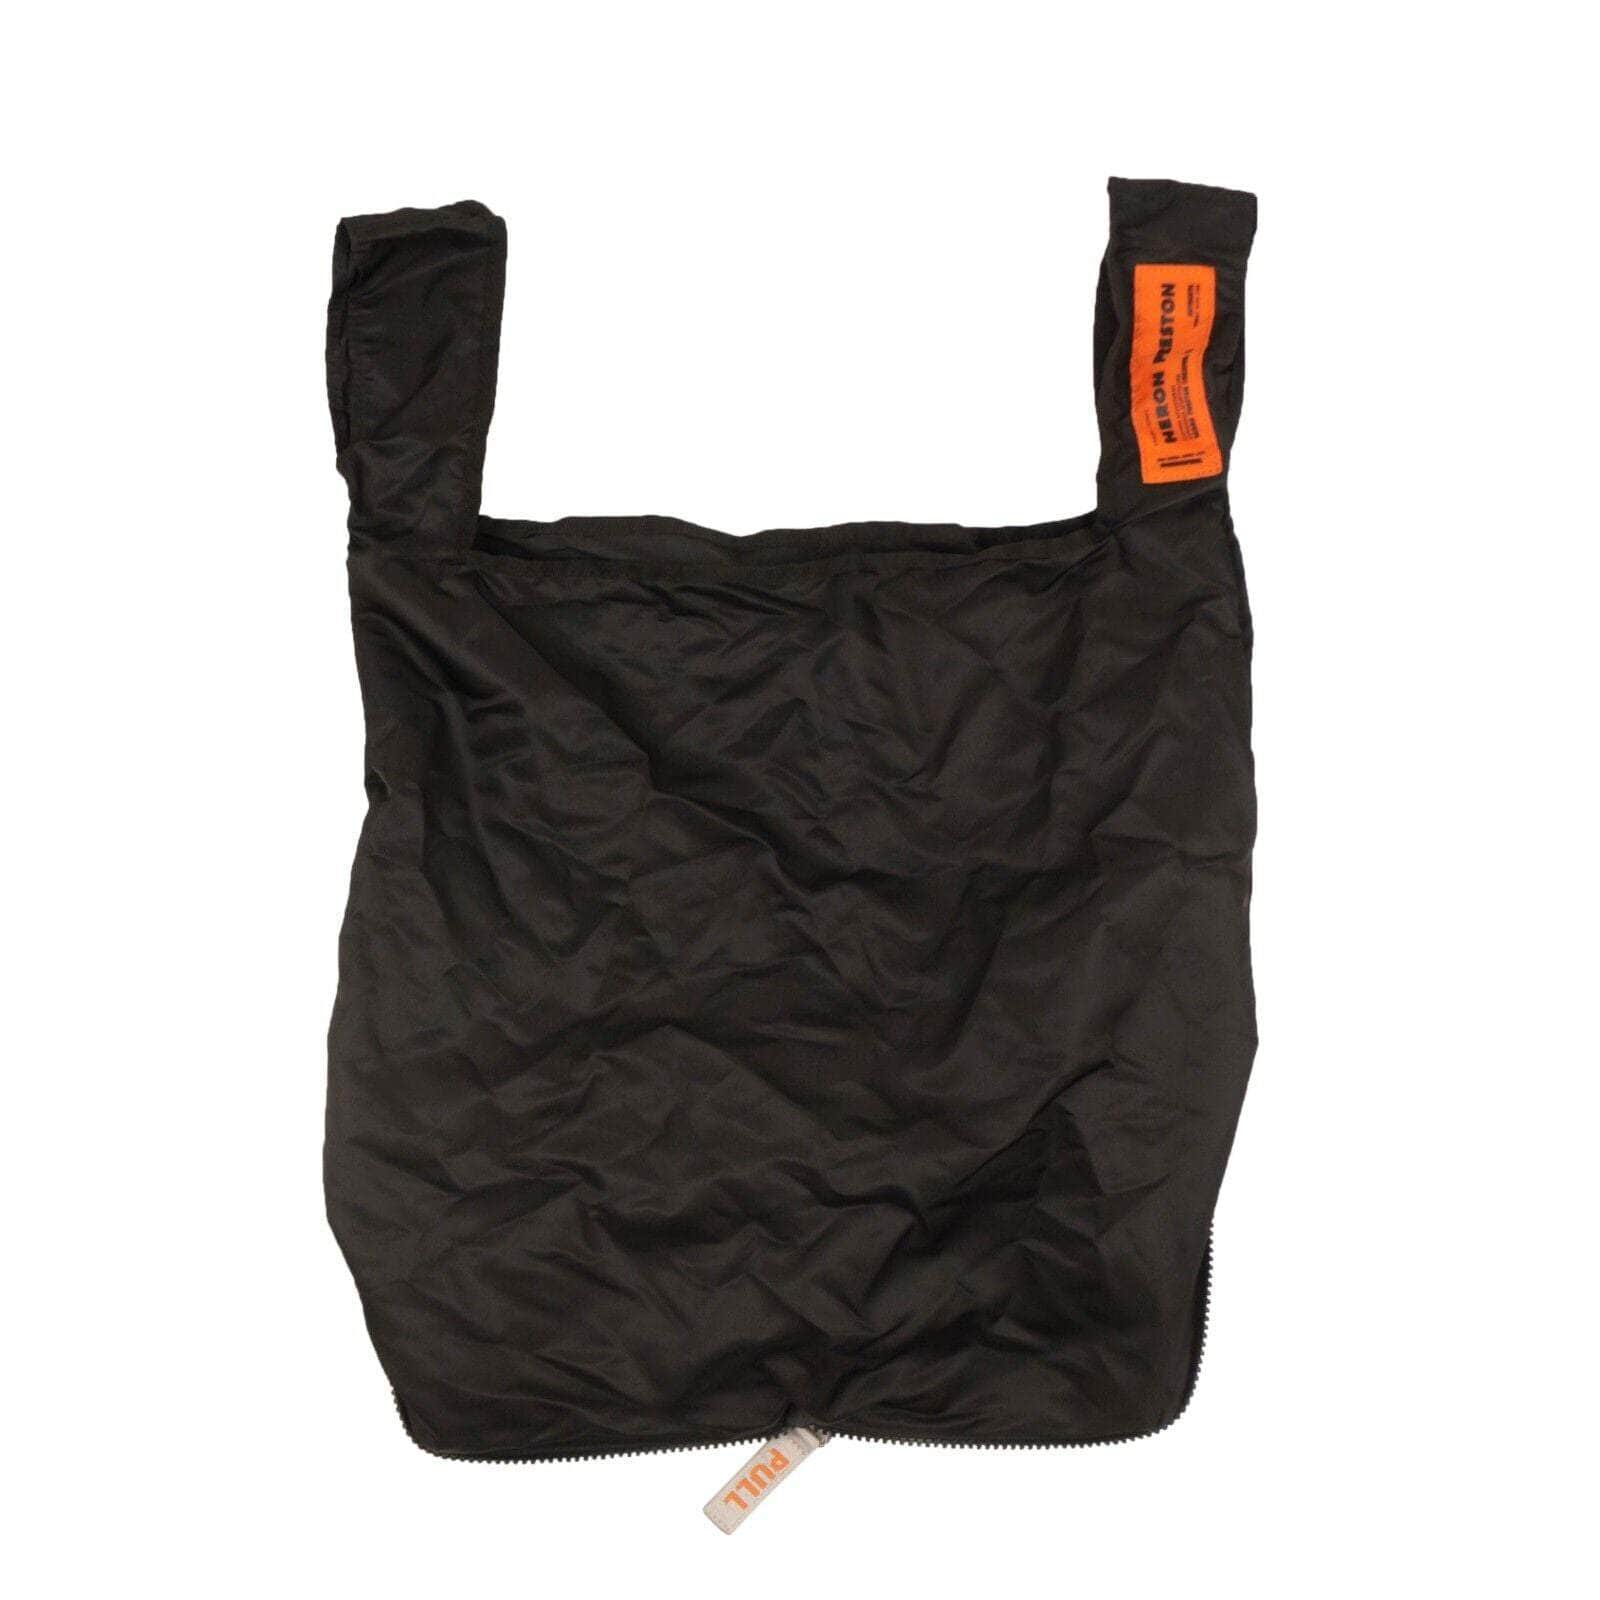 Heron Preston channelenable-all, chicmi, couponcollection, gender-mens, heron-preston, main-accessories, mens-shoes, mens-tote-bags, shop375, Stadium Goods, under-250 OS Black Grey Nylon Camo Zip Shopping Wallet Bag 80ST-HP-3026 80ST-HP-3026